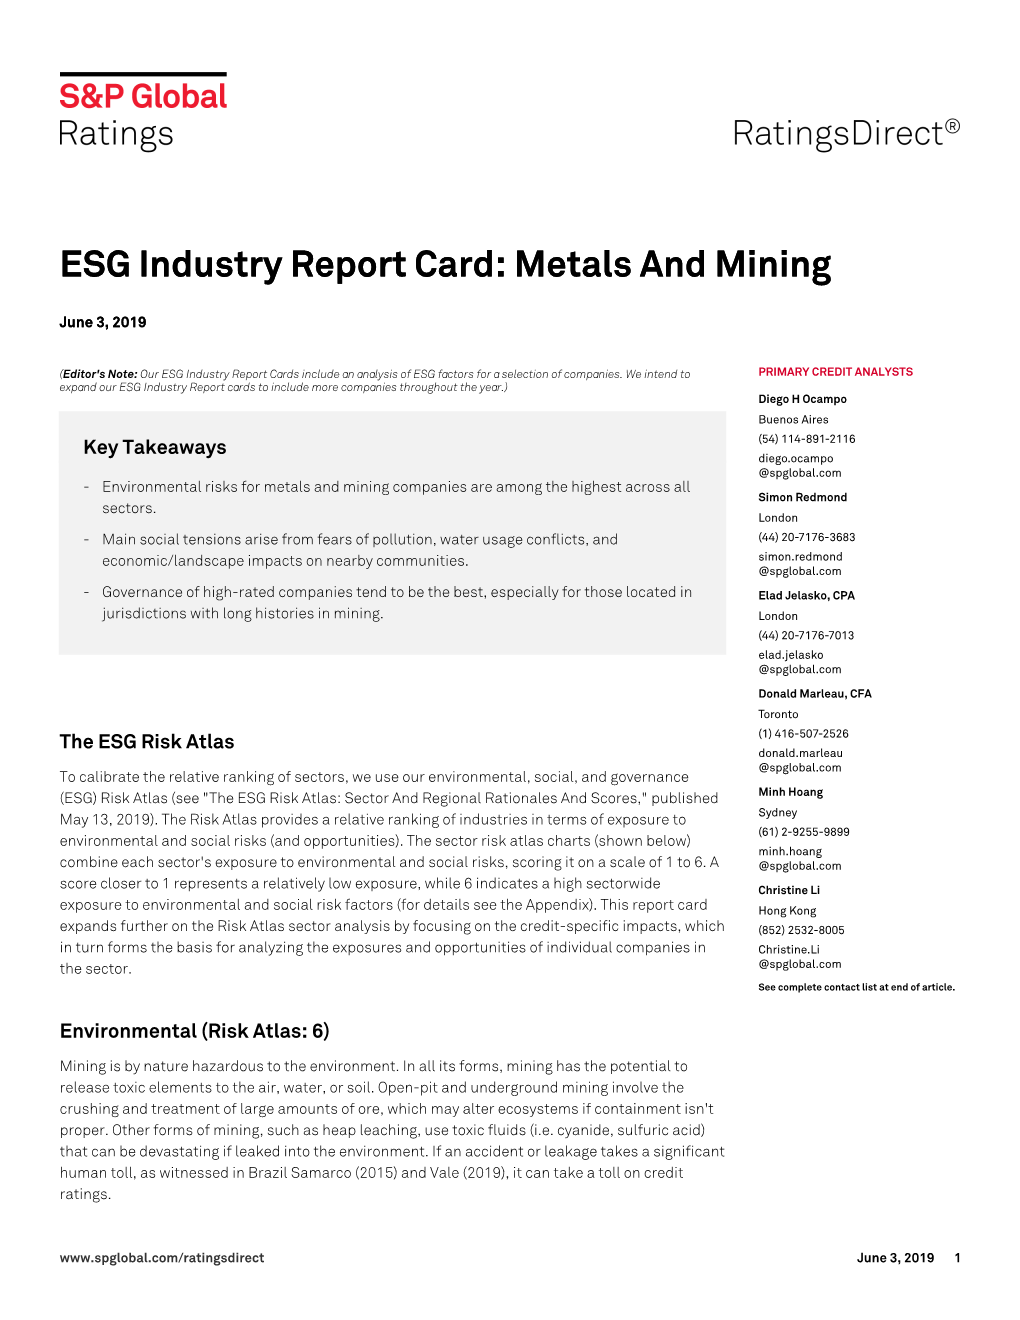 Metals and Mining ESG Industry Report Card